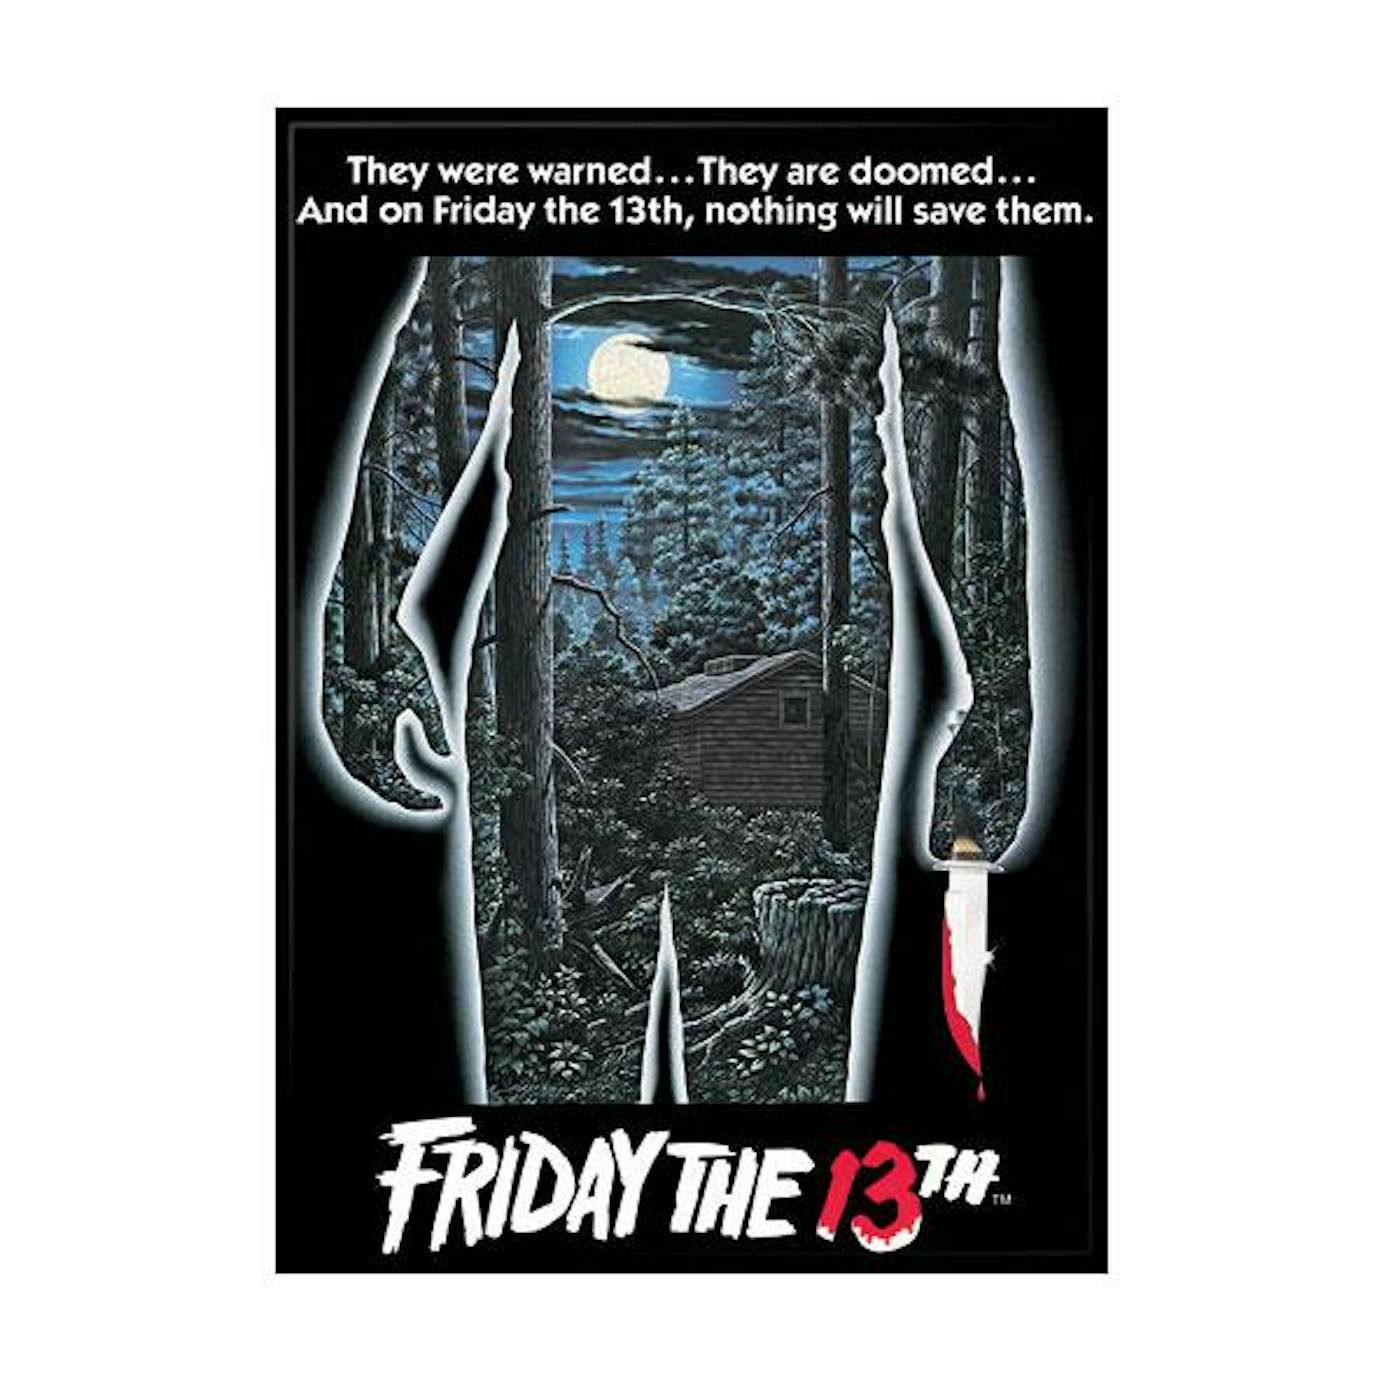 Friday the 13th (1980) Part One Poster Magnet